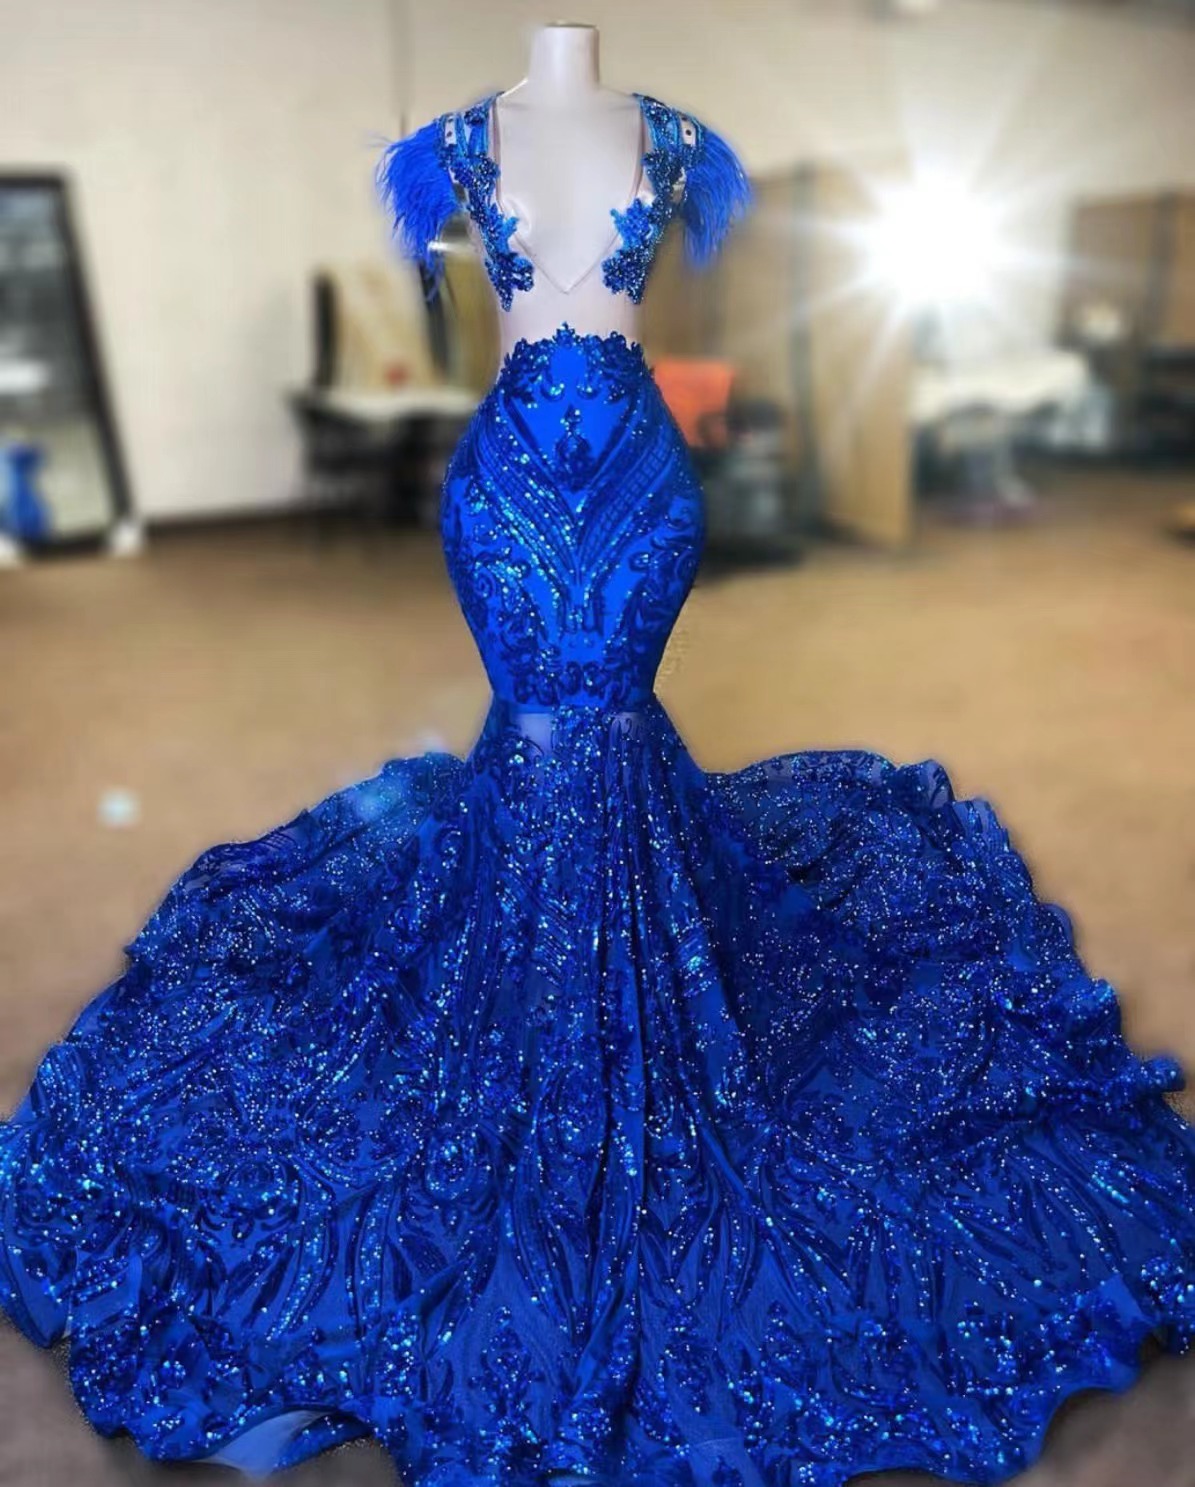 Feather Modest Prom Dresses 2024 Elegant Royal Blue Sparkly Mermaid Prom Gown 2025 Formal Wear Sequin Applique Fashion Glitter Evening Dresses